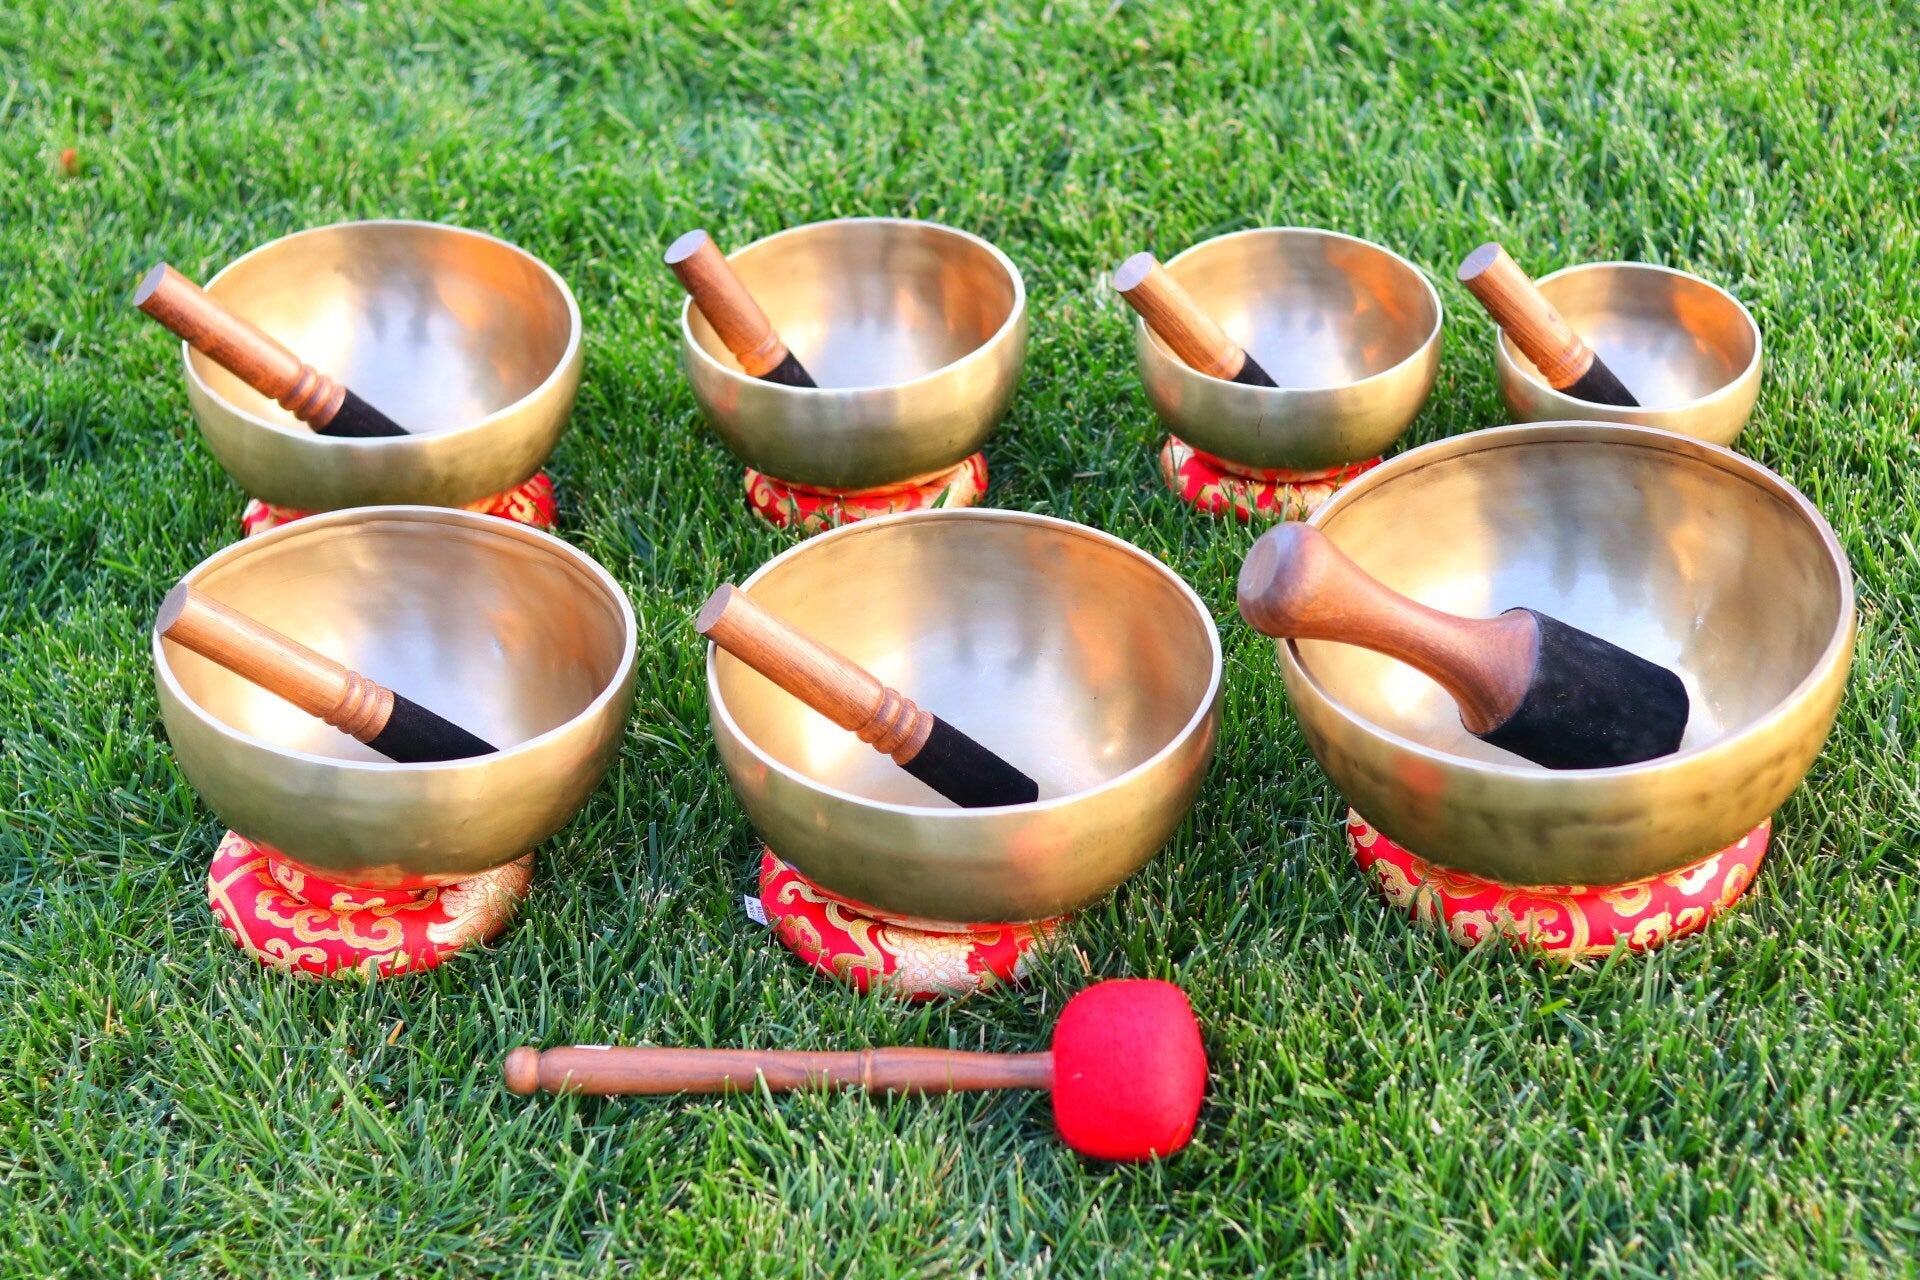 SALE!!!! !!High quality | 7 chakra singing bowl used for meditation, healing, mindfulness, sound therapy and yoga.